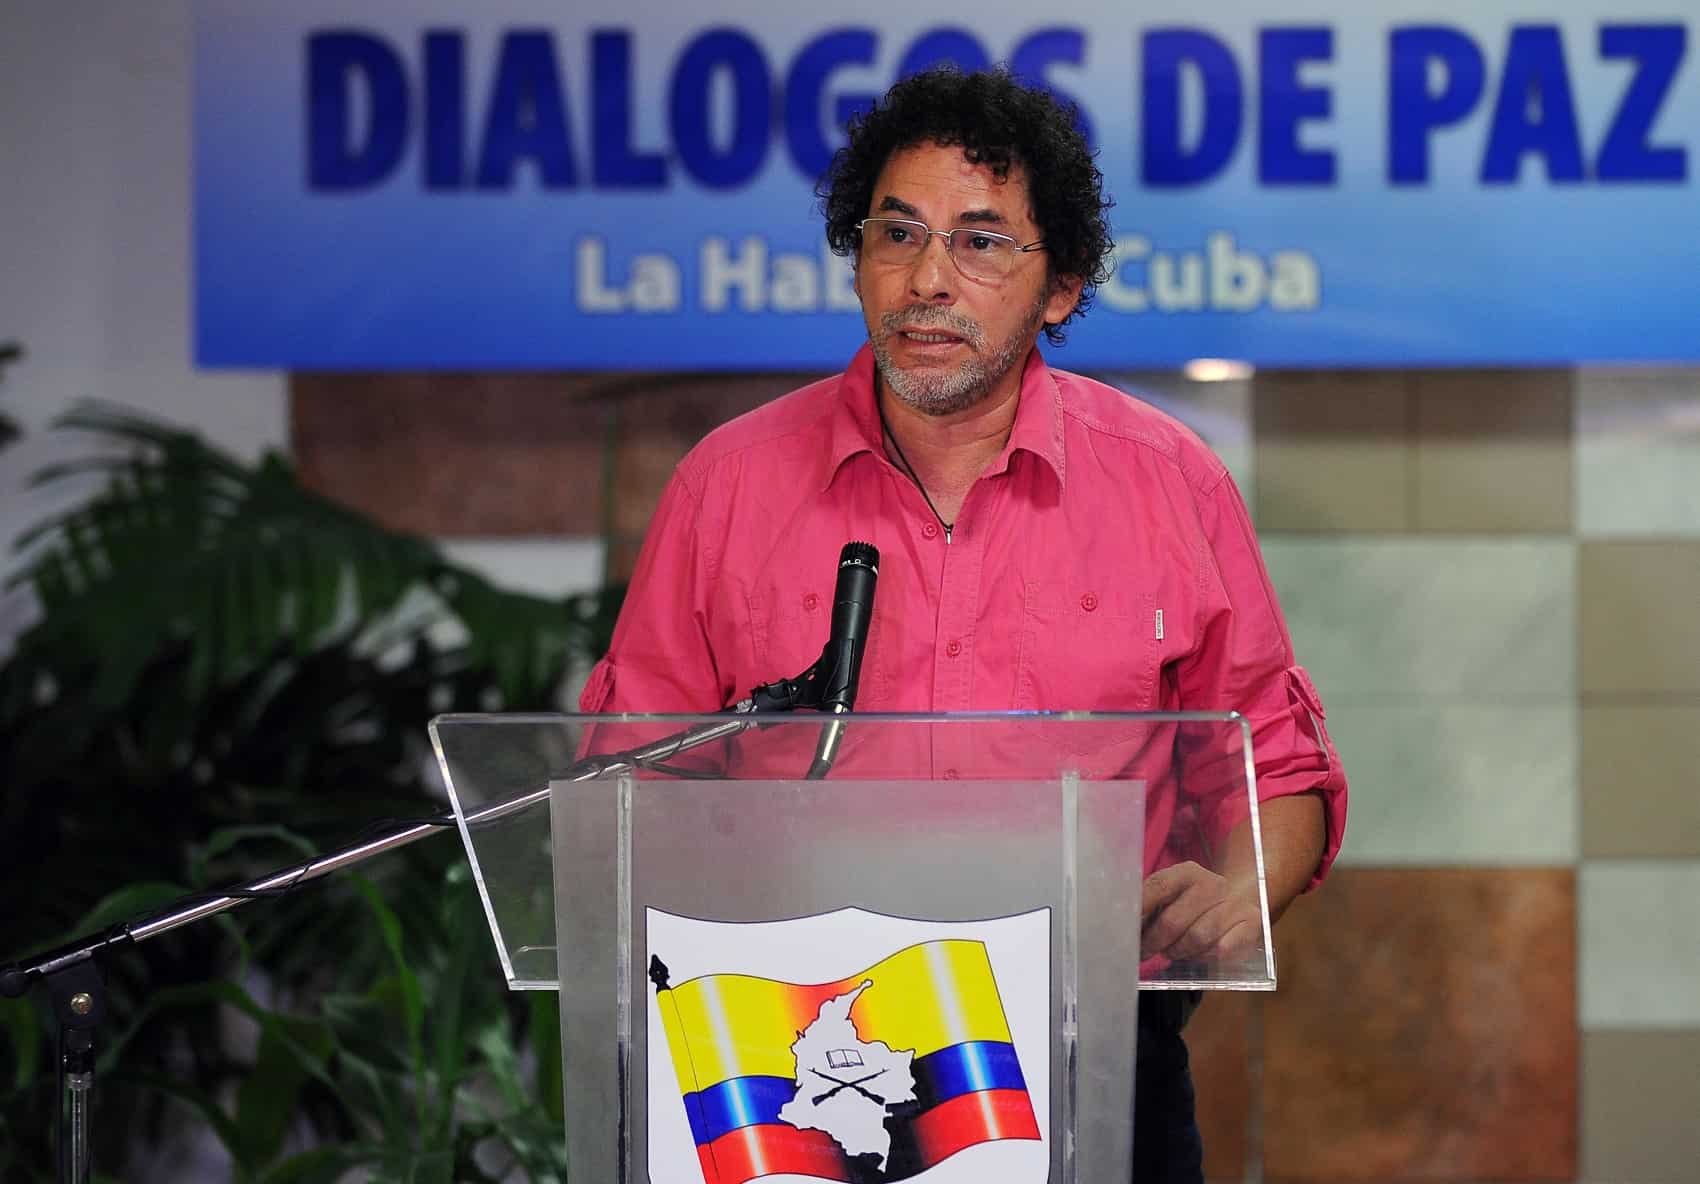 Revolutionary Armed Forces of Colombia (FARC) commander Pastor Alape reads a statement at Convention Palace in Havana during the peace talks with the Colombian government, on July 3, 2015.